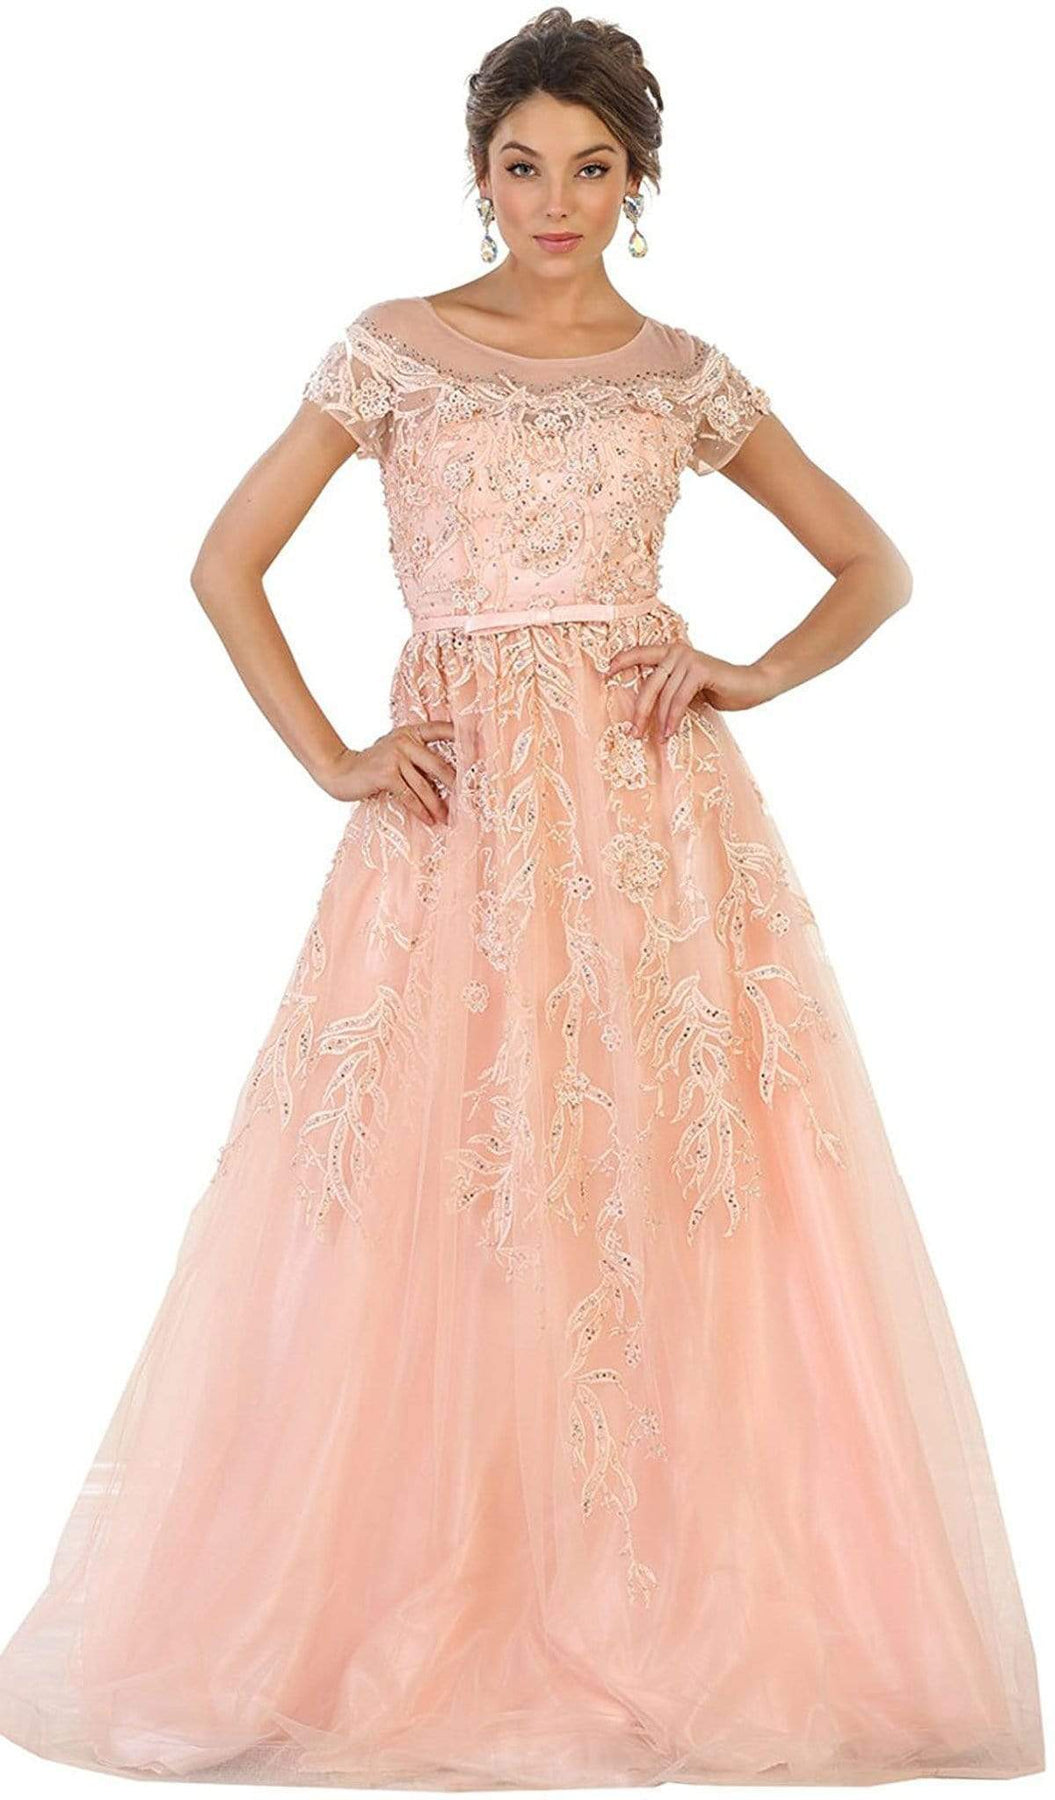 May Queen - Shimmering Illusion Scoop Neck A-line Evening Gown Special Occasion Dress 4 / Blush